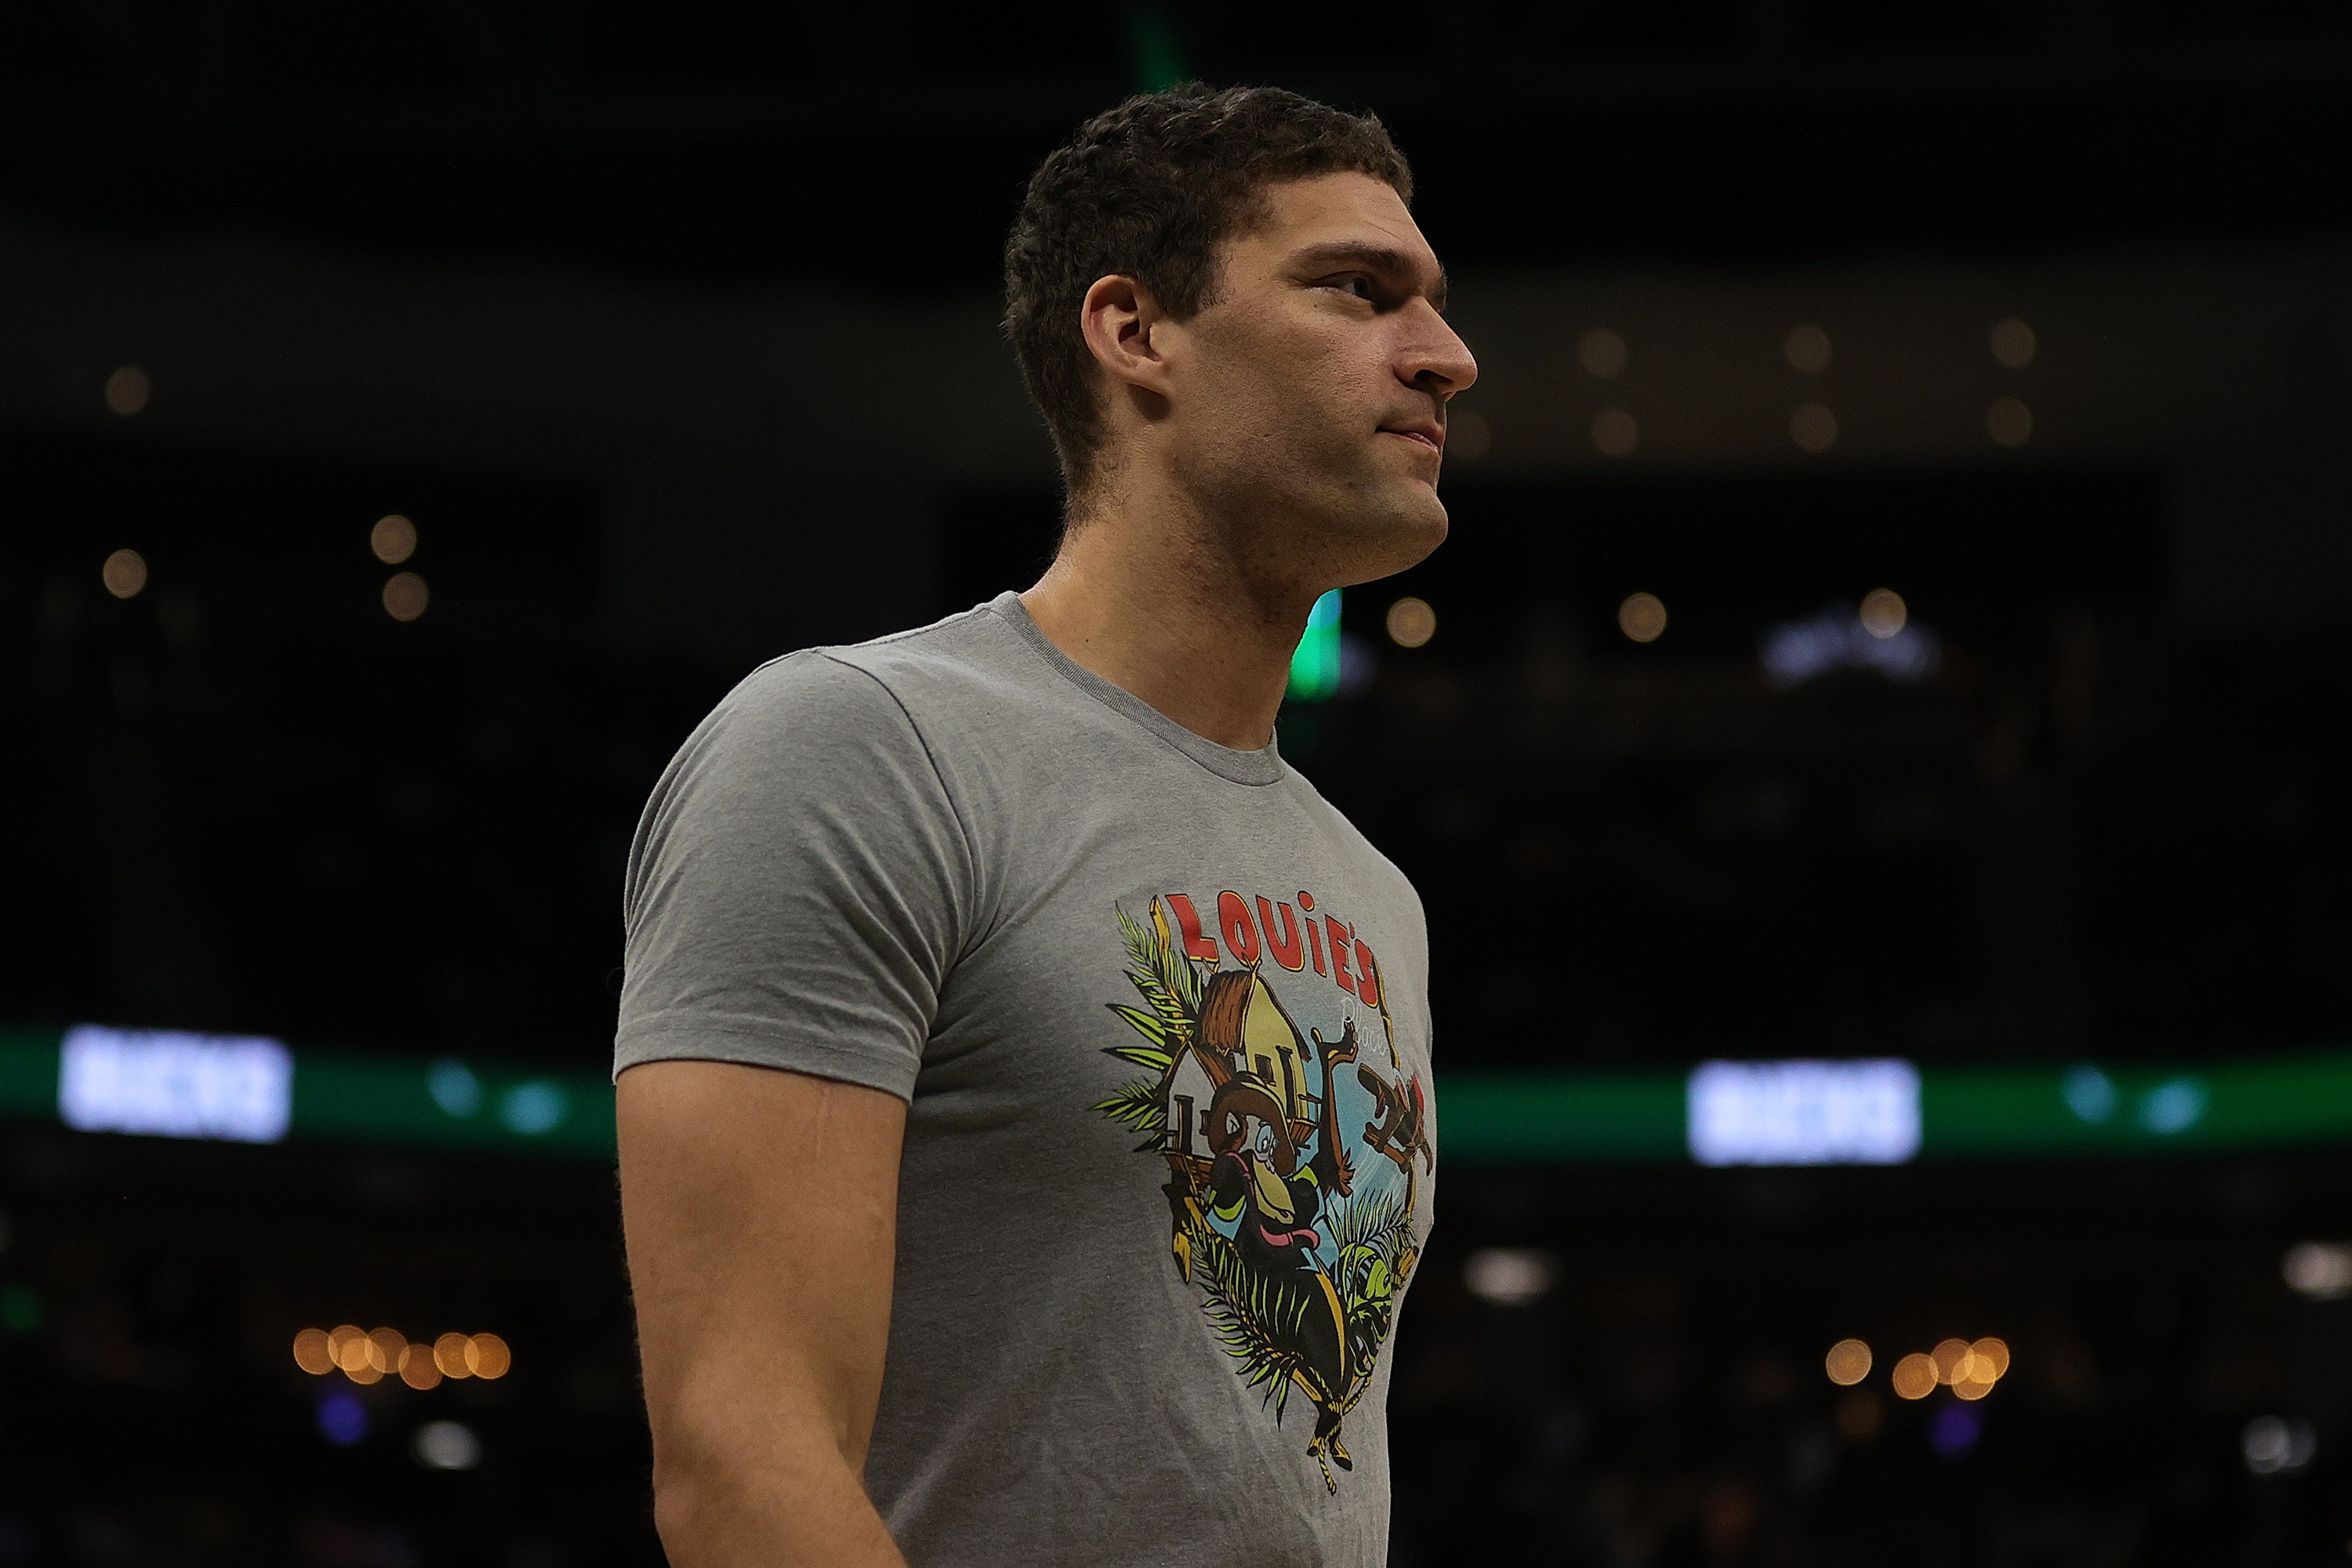 Milwaukee Bucks center Brook Lopez on the court during an NBA game in November 2021